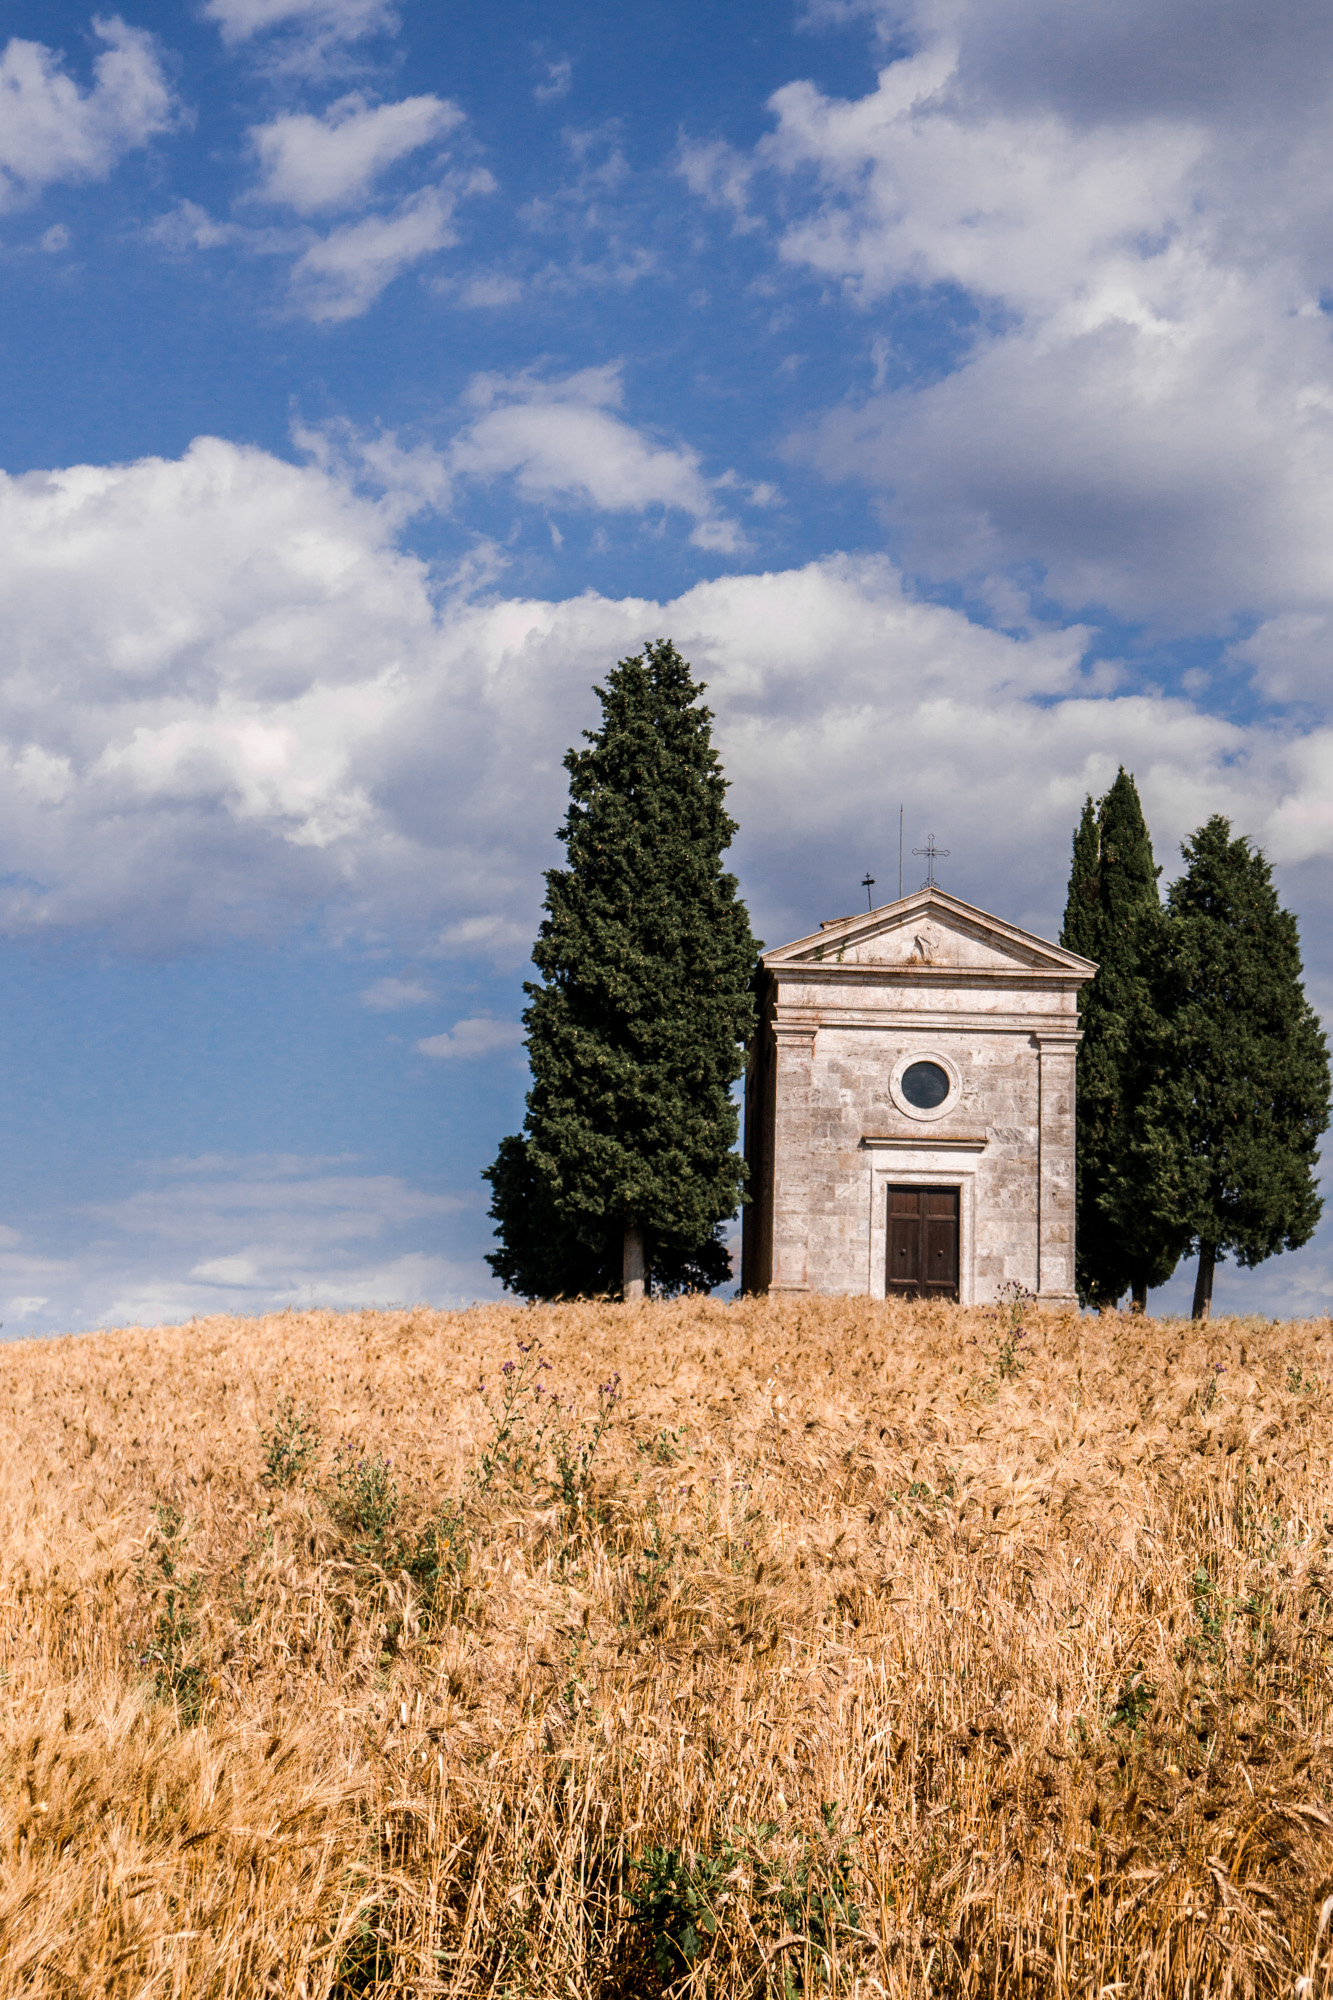 France/Italy roadtrip – Val d’Orcia